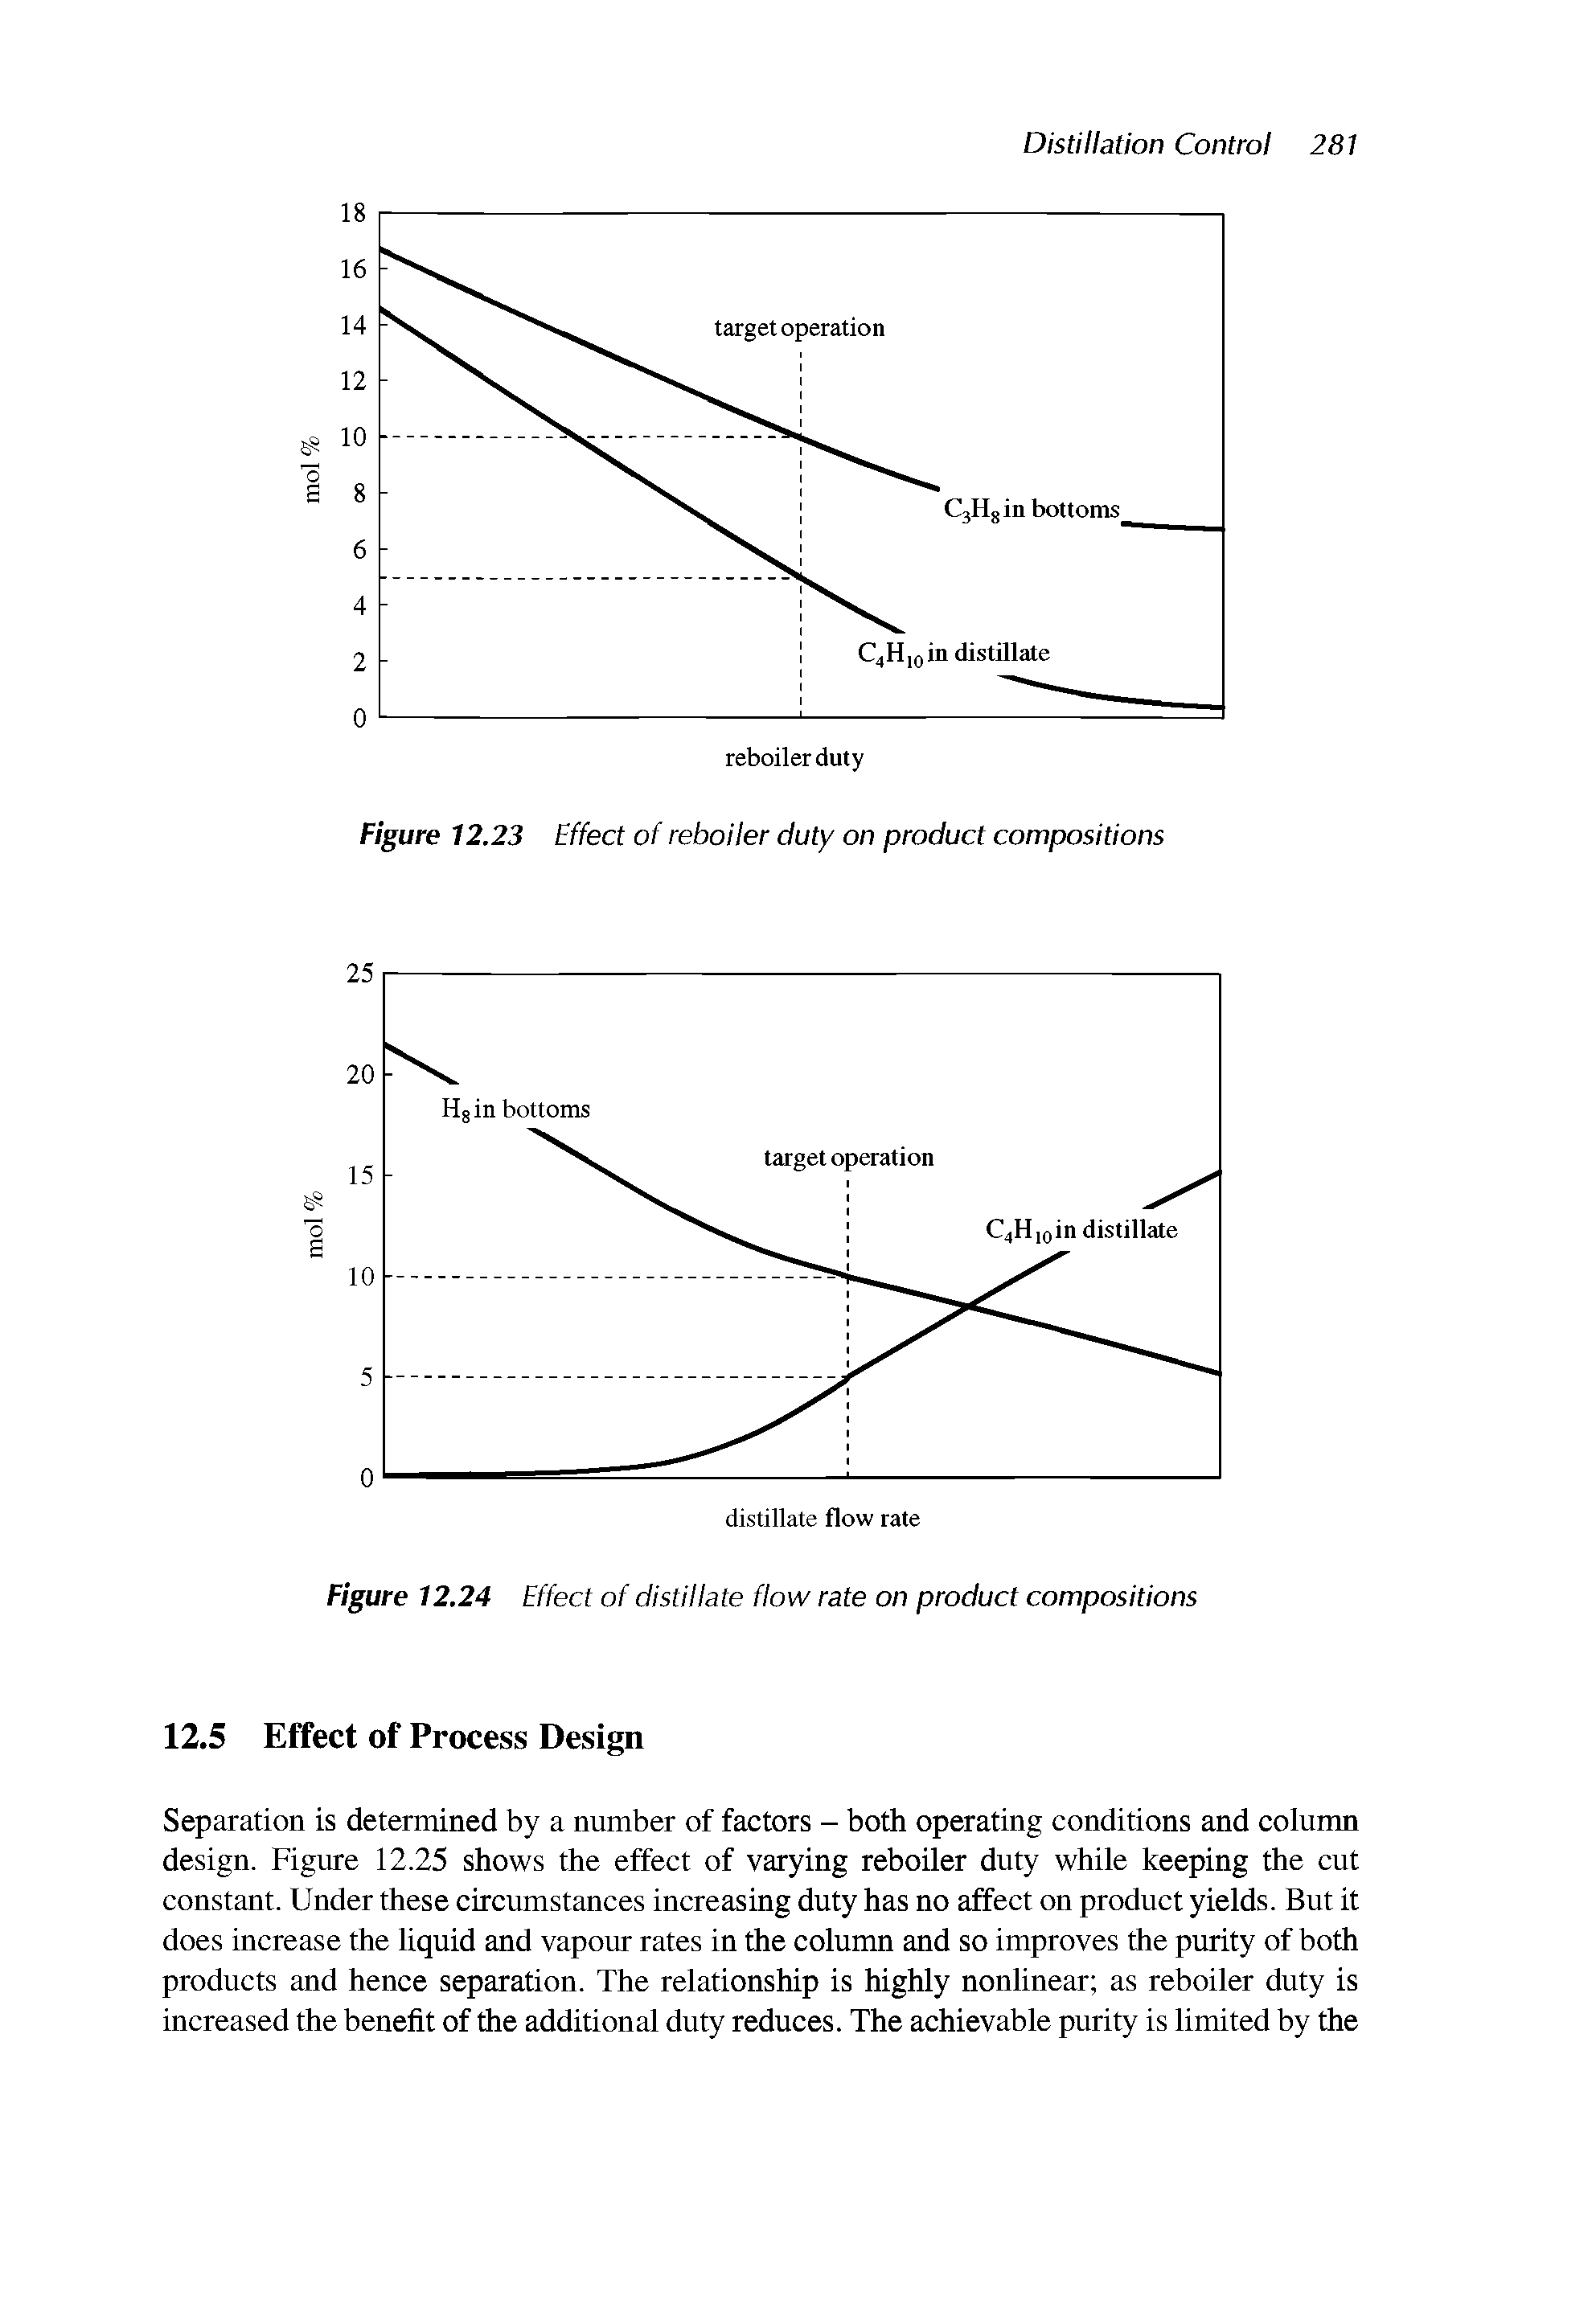 Figure 12.24 Effect of distillate flow rate on product compositions...